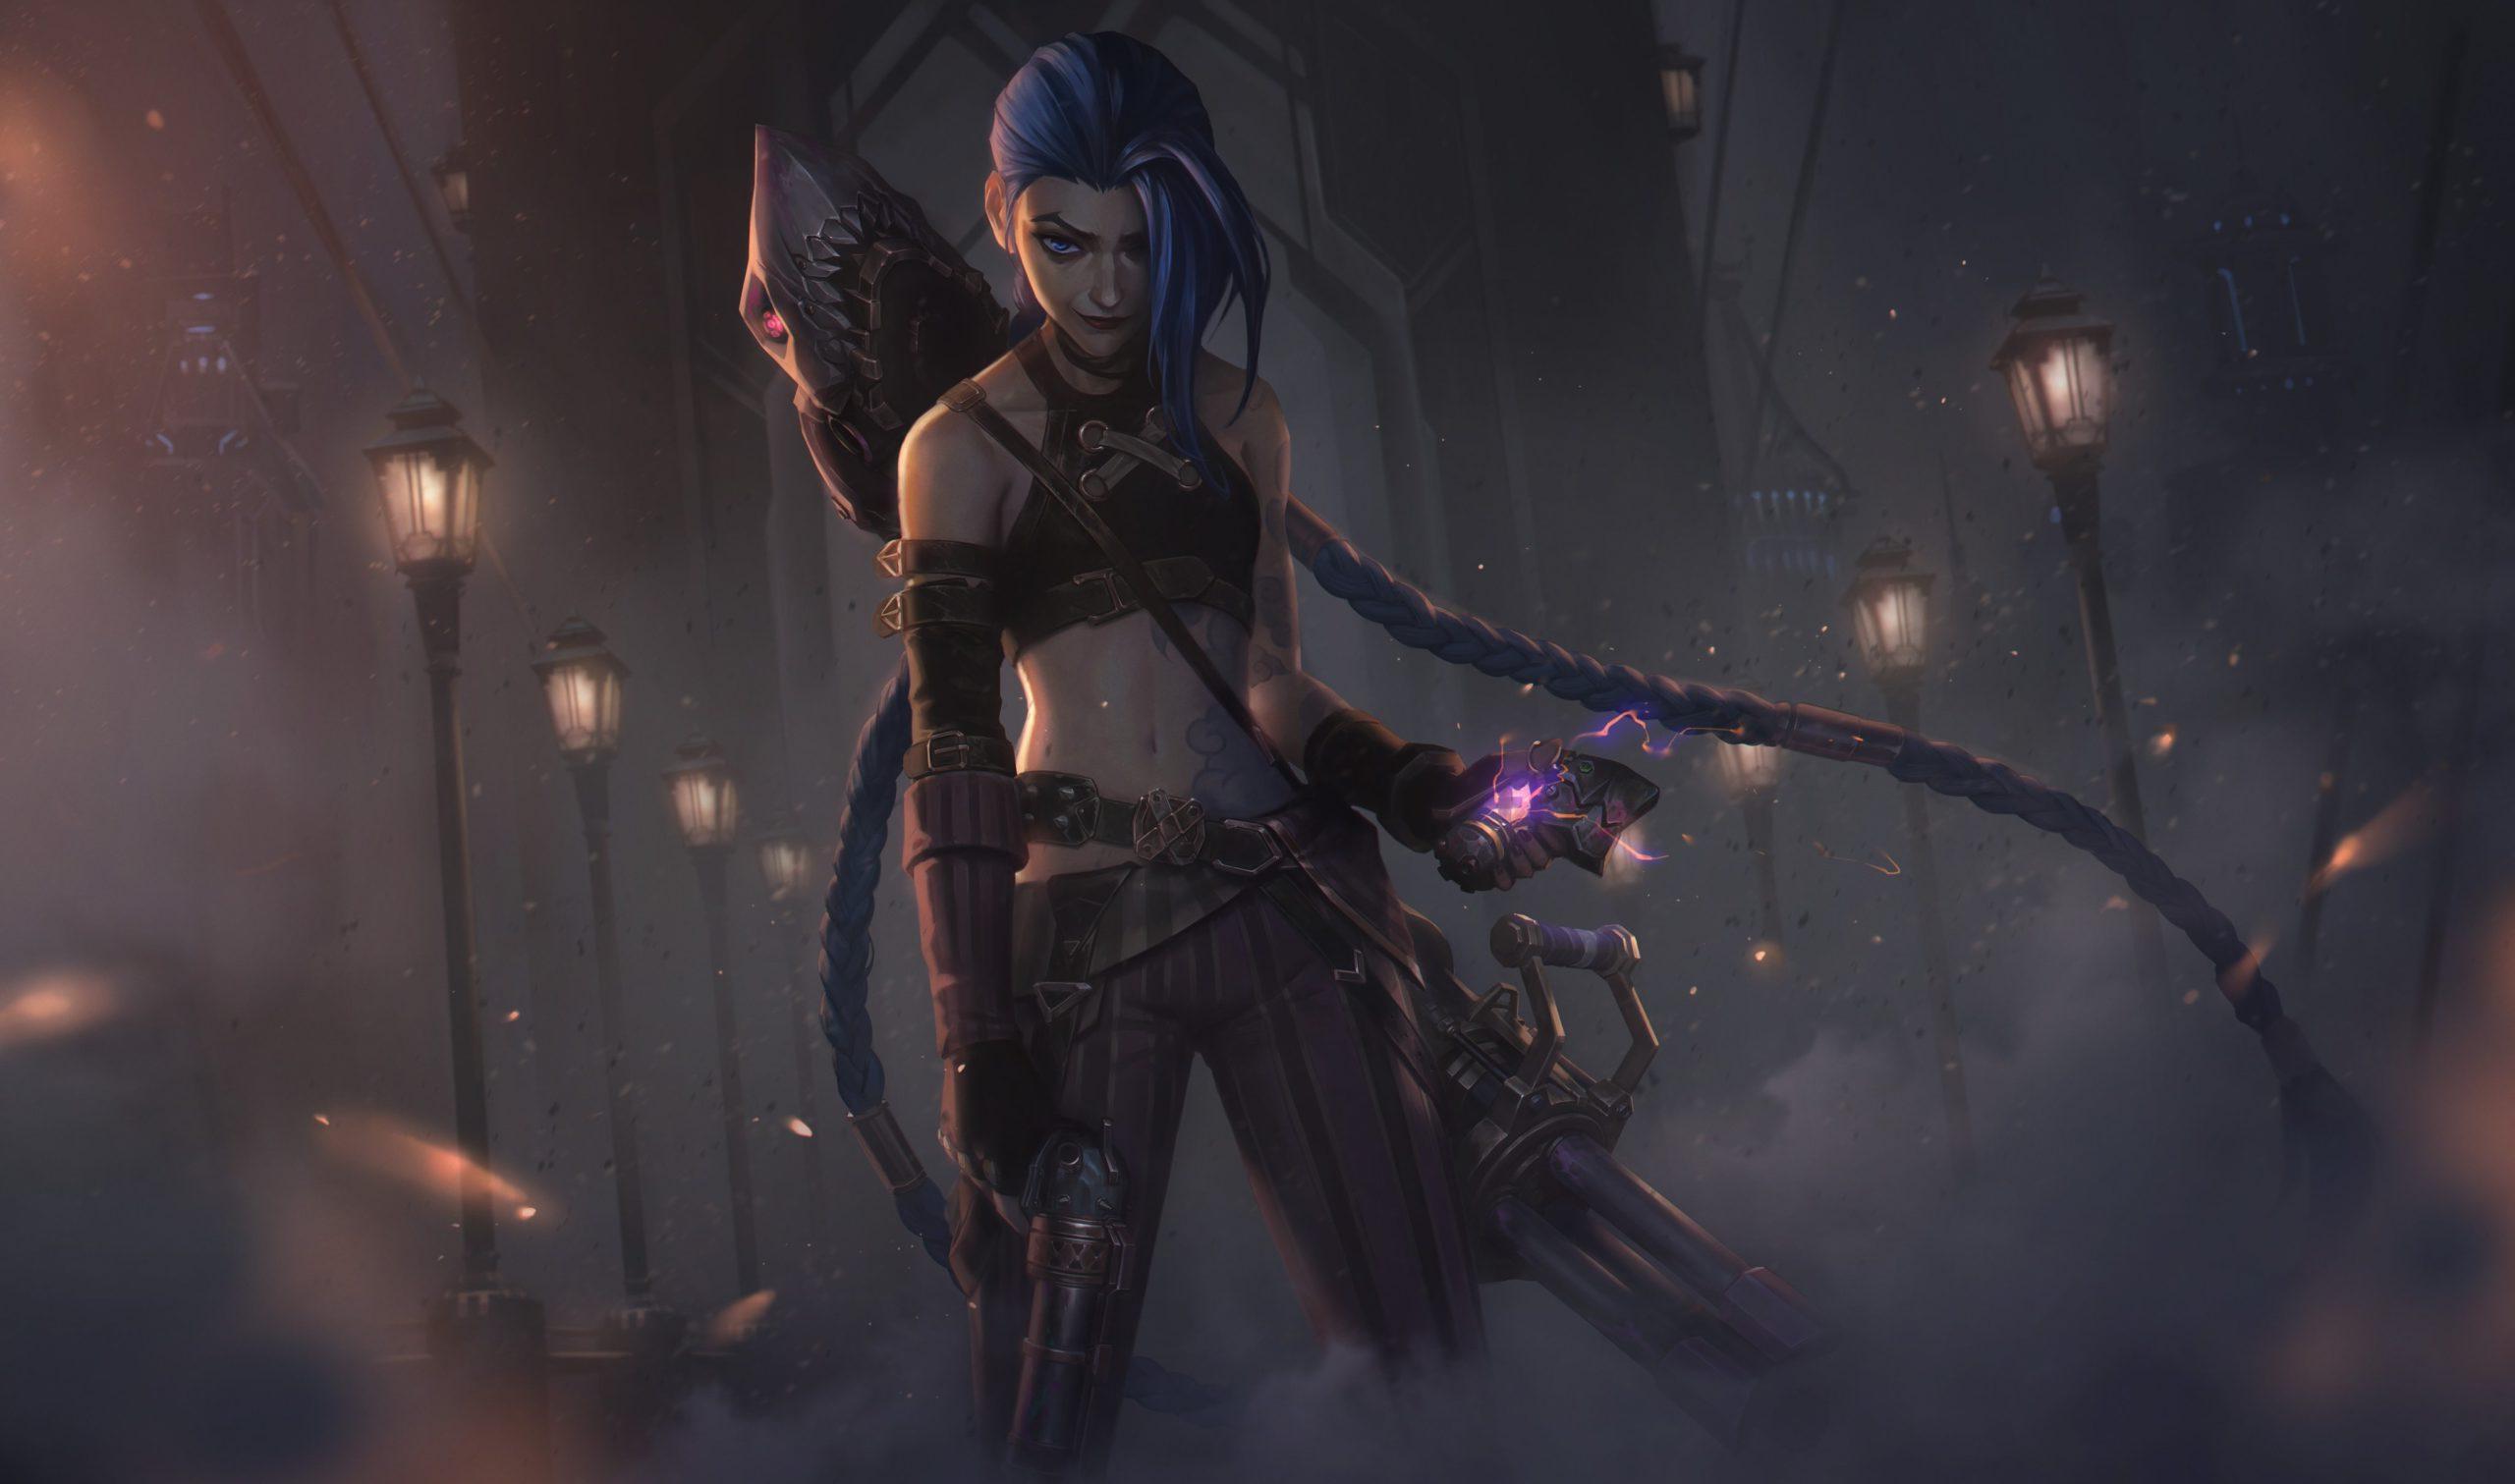 The Arcane skins for Jinx, revealed Caitlyn in Legends of The Ring in League of Legends News 24